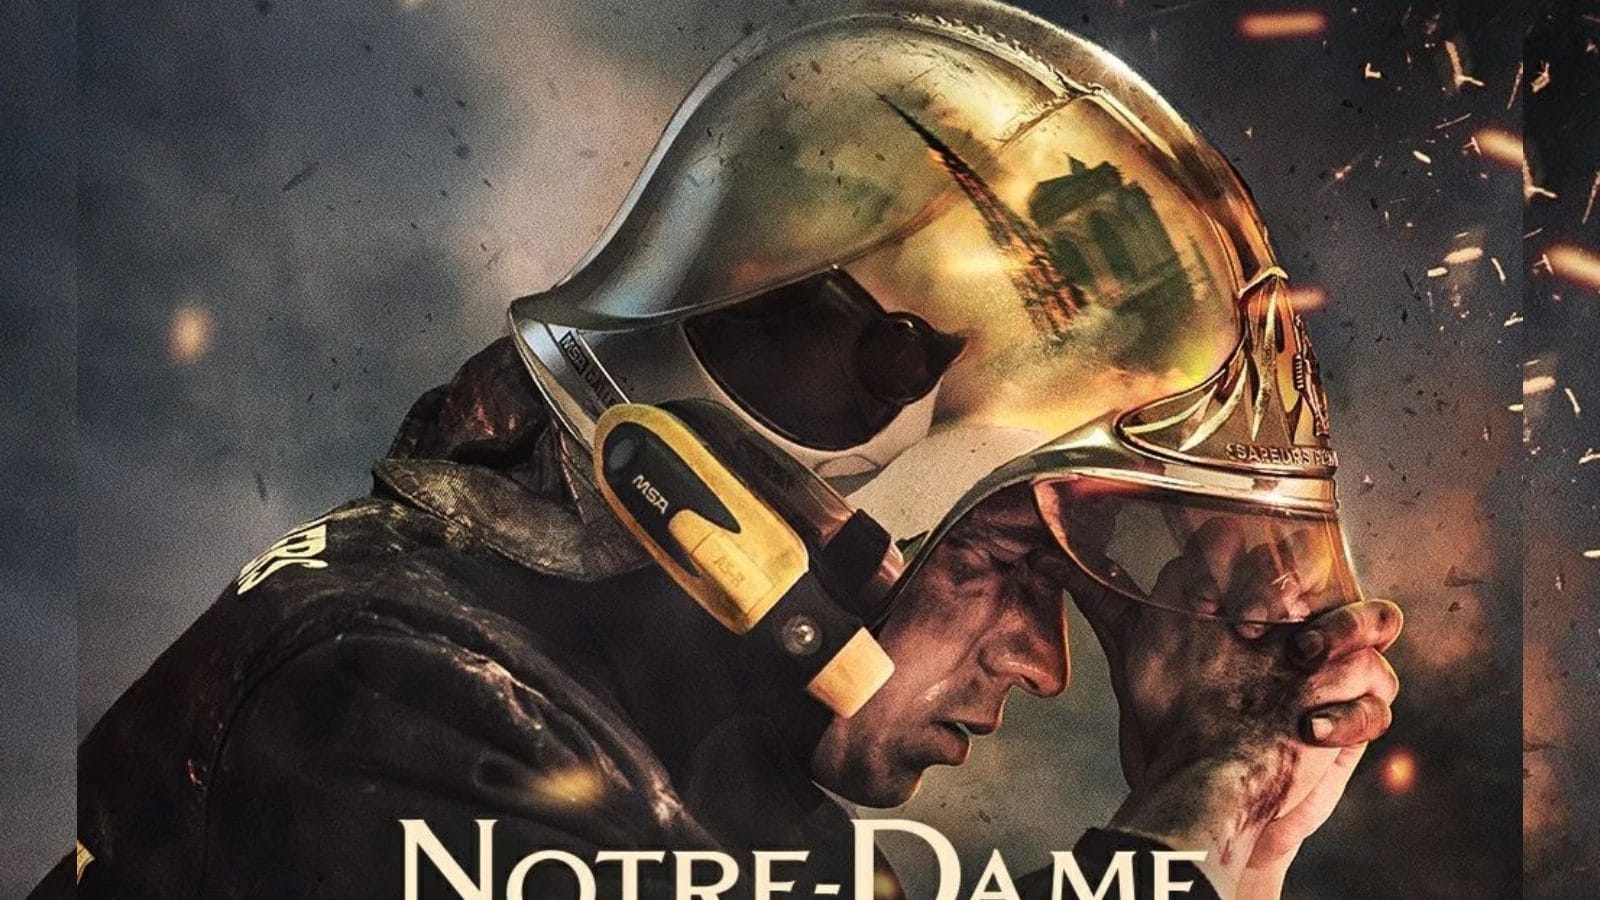 Ambassador of France to India Holds Special Screening of French Film ‘Notre-Dame On Fire’ in Delhi